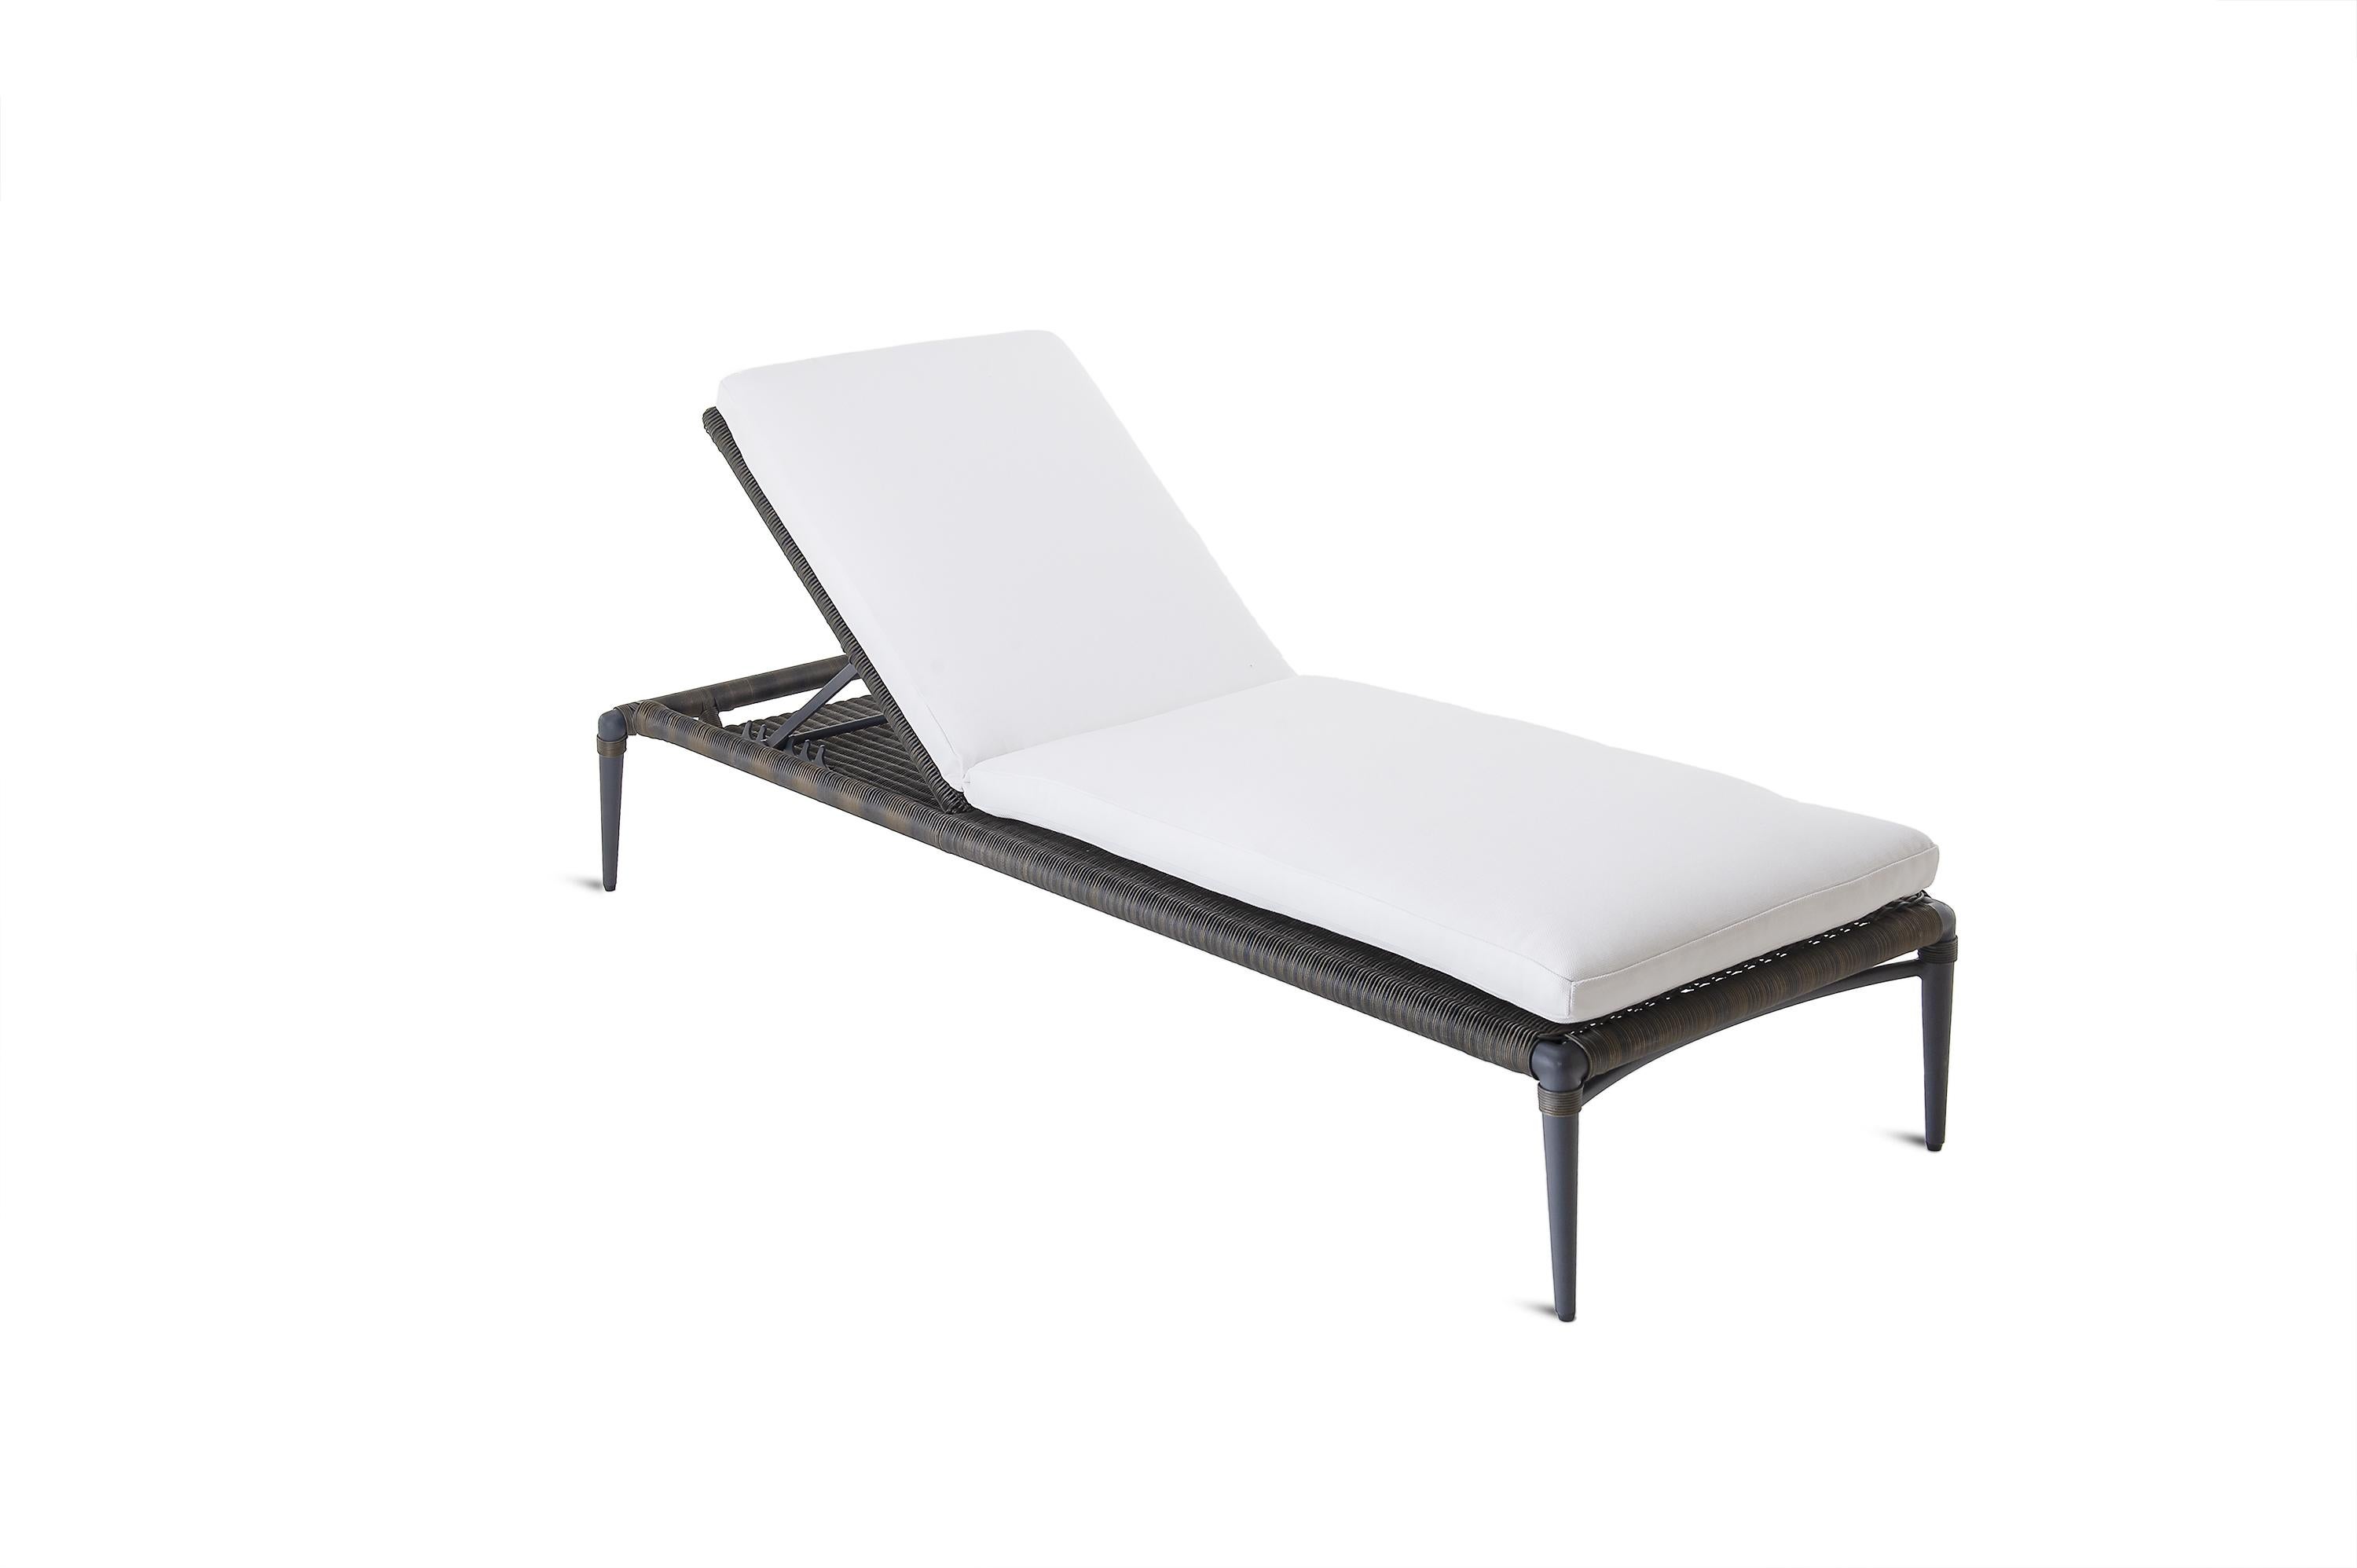 Aluminum Unopiu' Experience Sunlounger Outdoor Collection For Sale